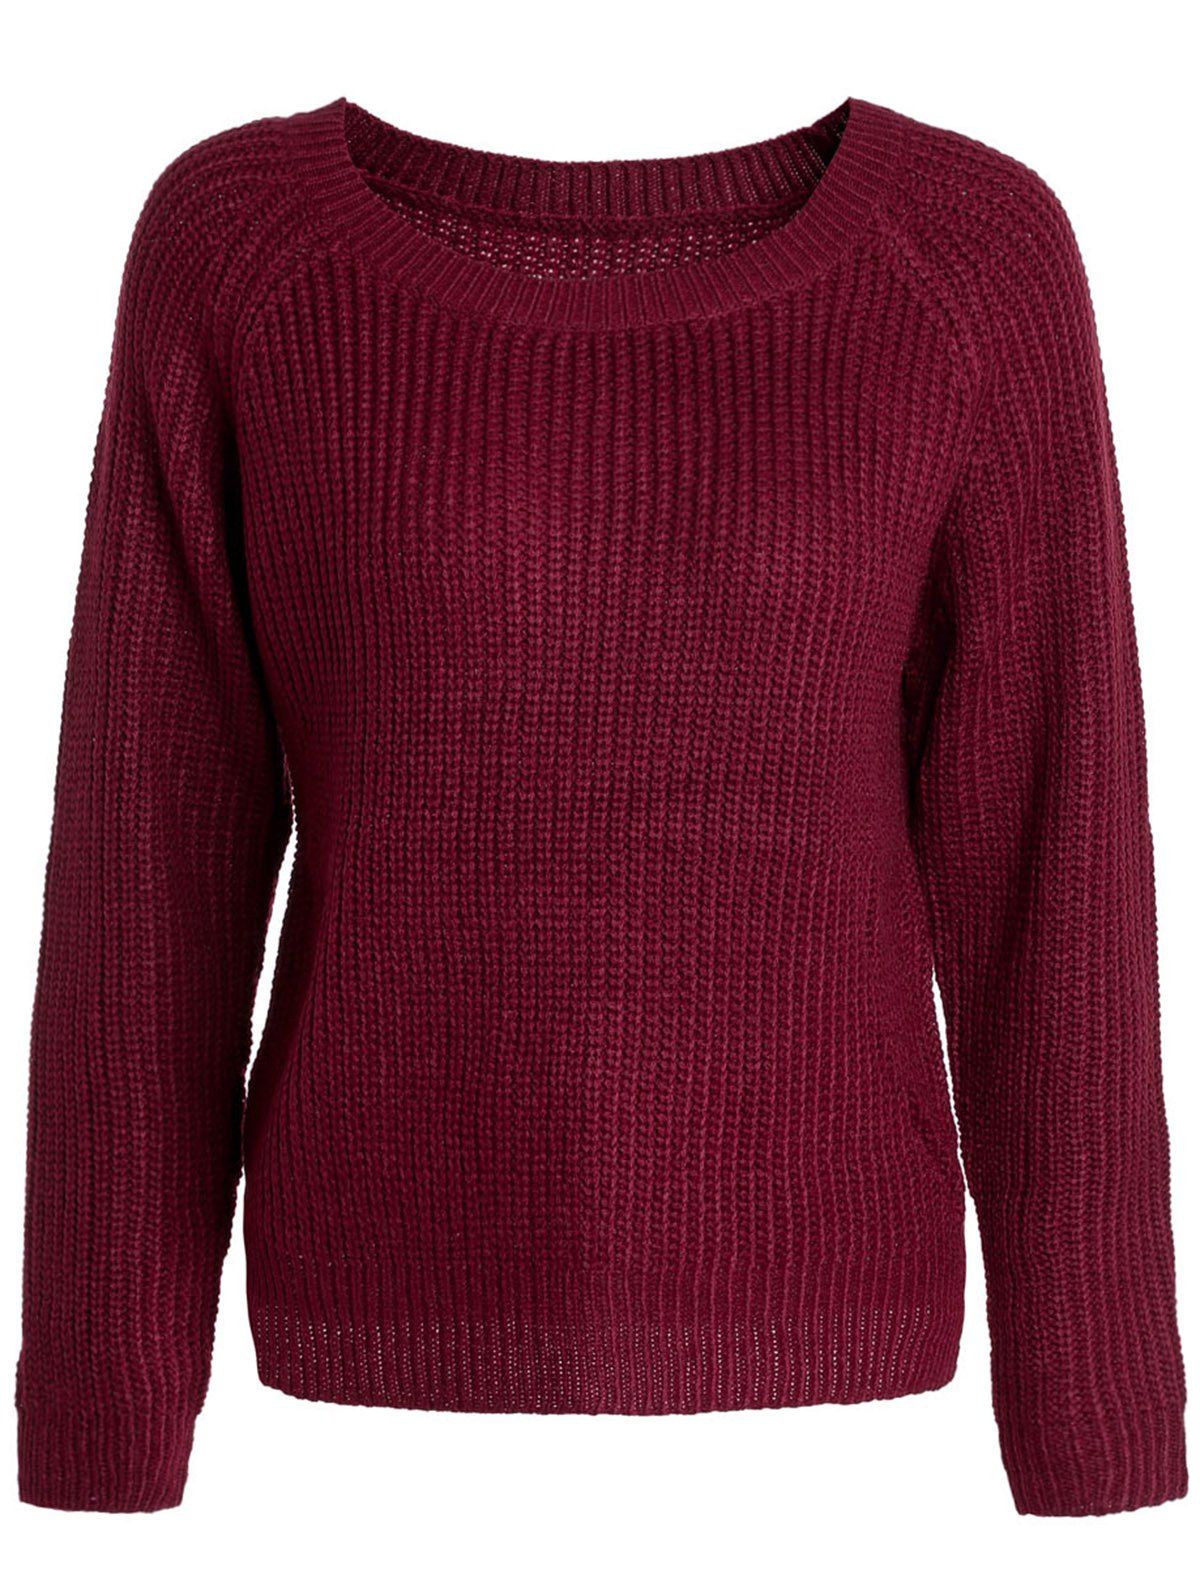 [41% OFF] 2021 Scoop Neck Long Sleeve Sweater For Women In WINE RED ...